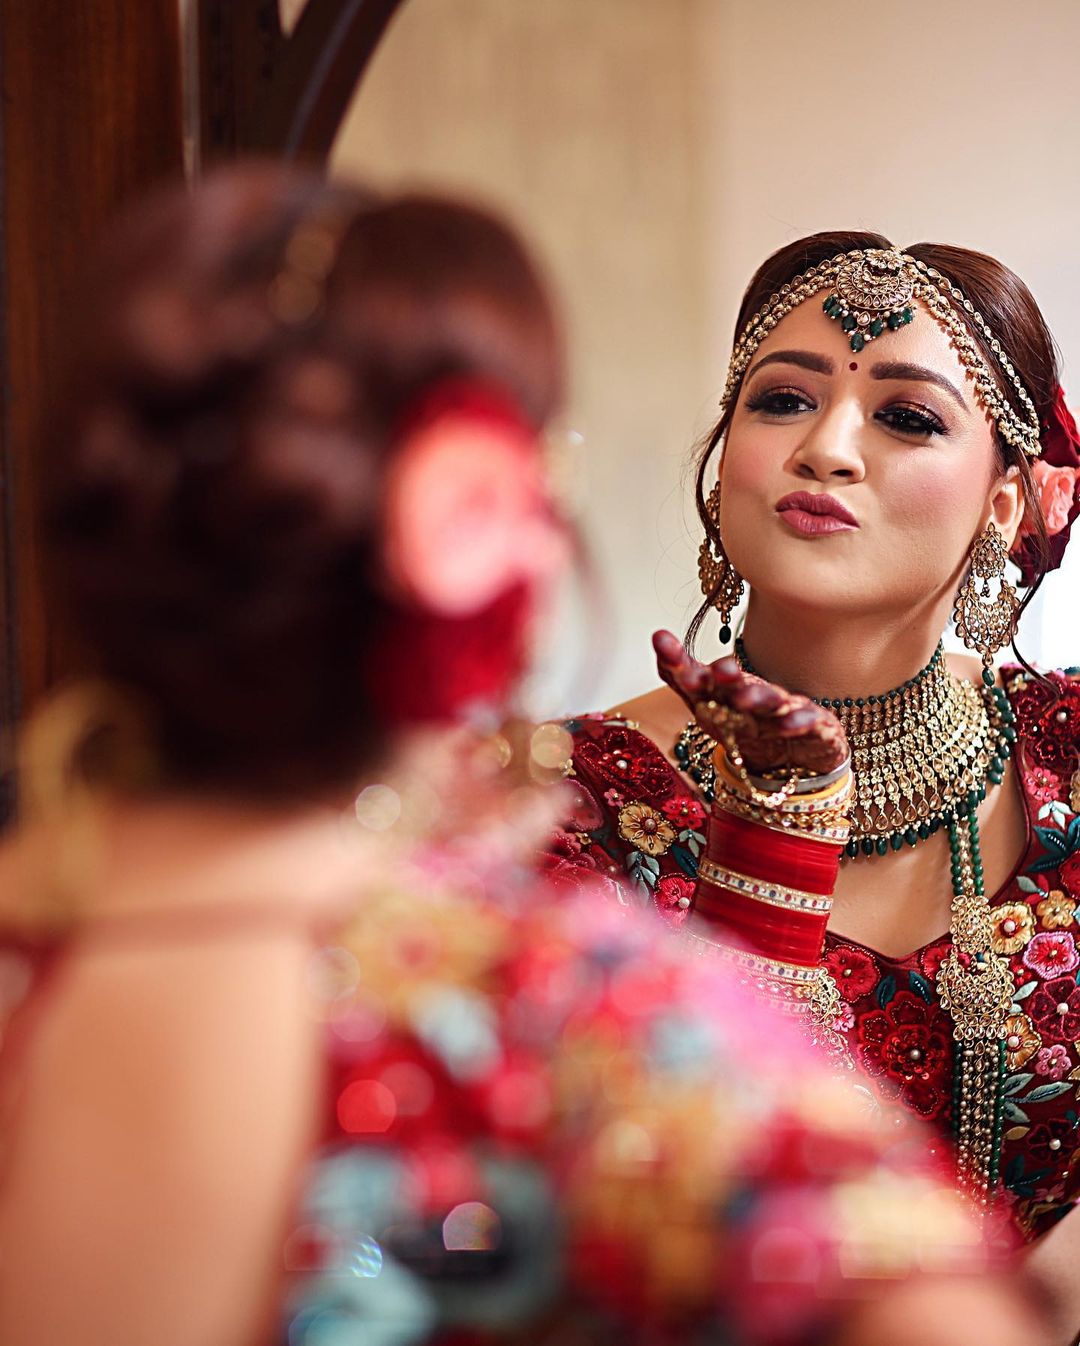 Indian Wedding Bride Poses Photos and Images & Pictures | Shutterstock